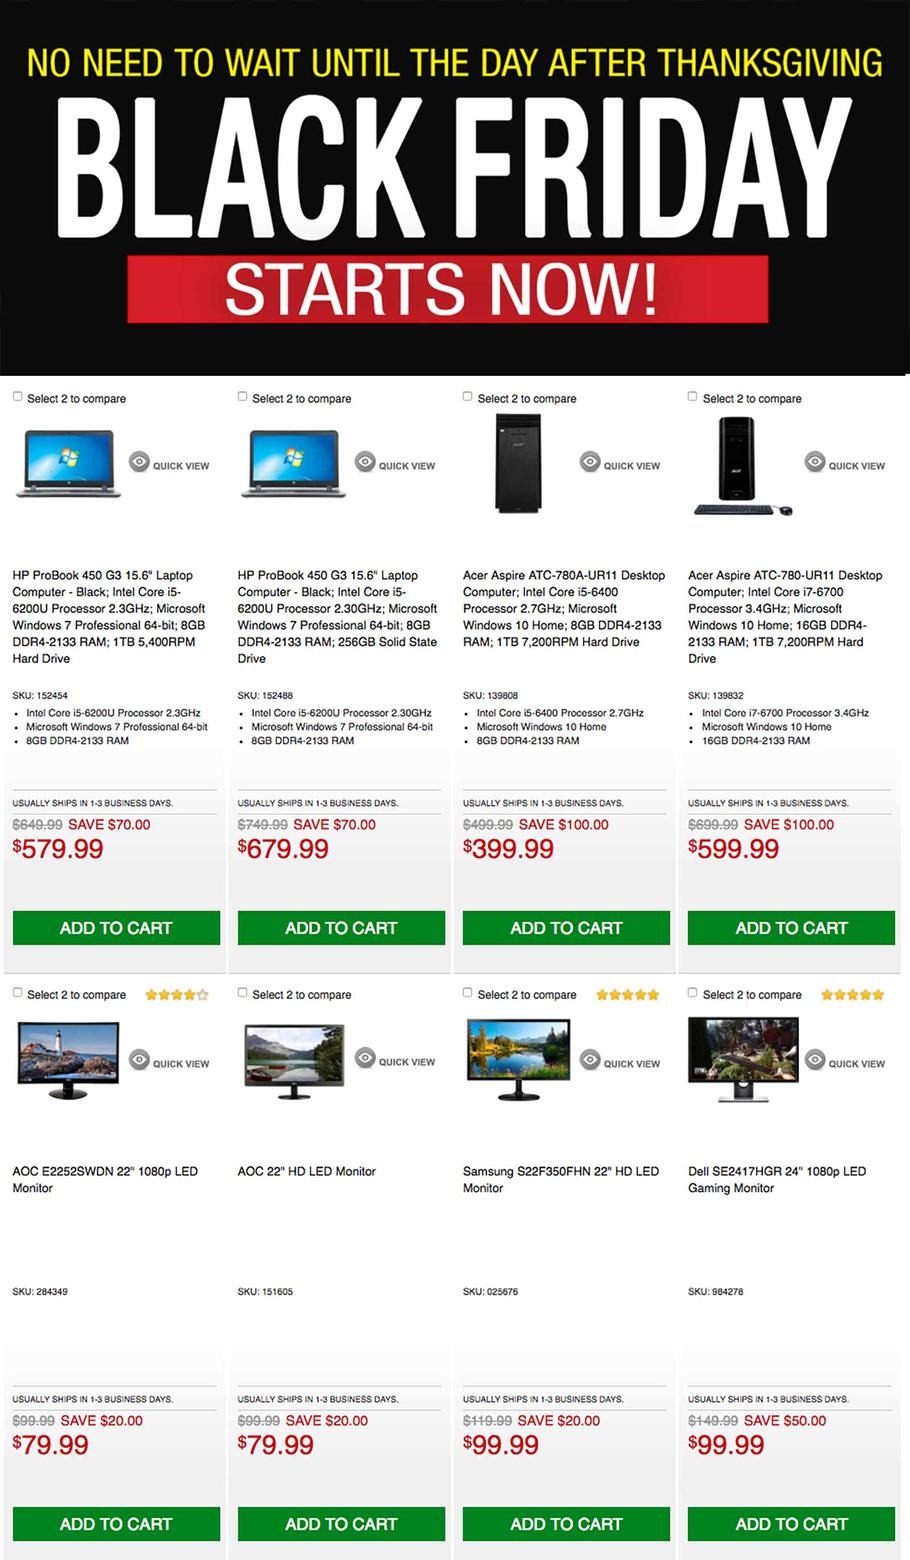 Micro Center Black Friday Ads, Sales, and Deals 2016, Promo Codes